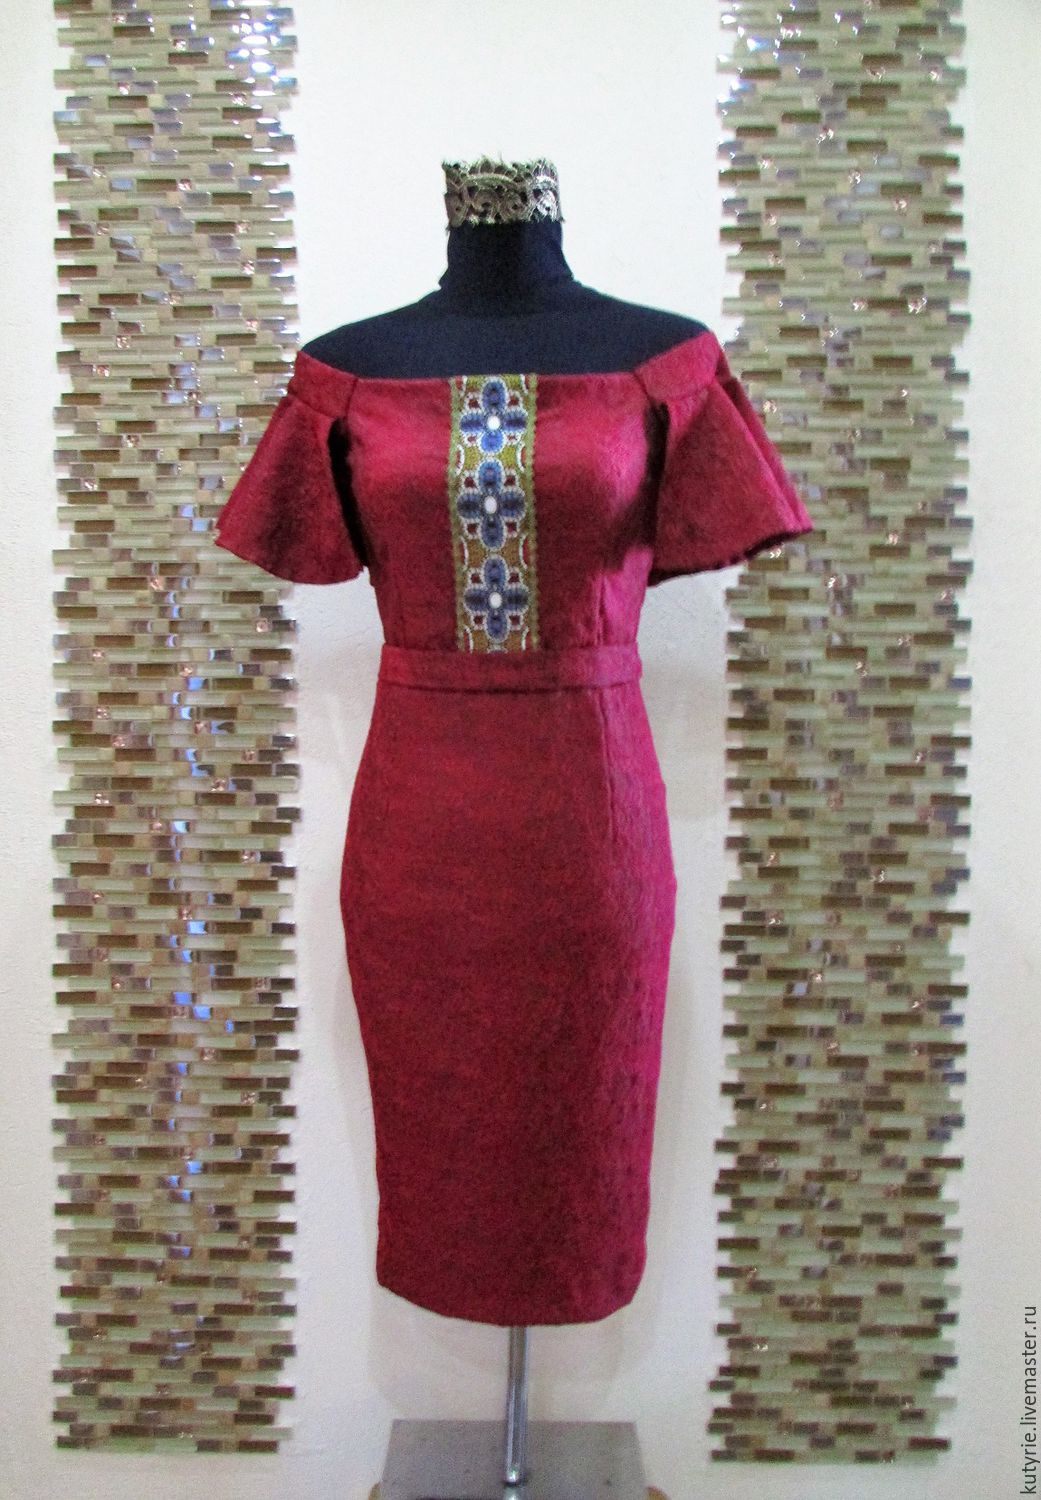 Author's jacquard dress 'Jewels'-red, Dresses, Moscow,  Фото №1